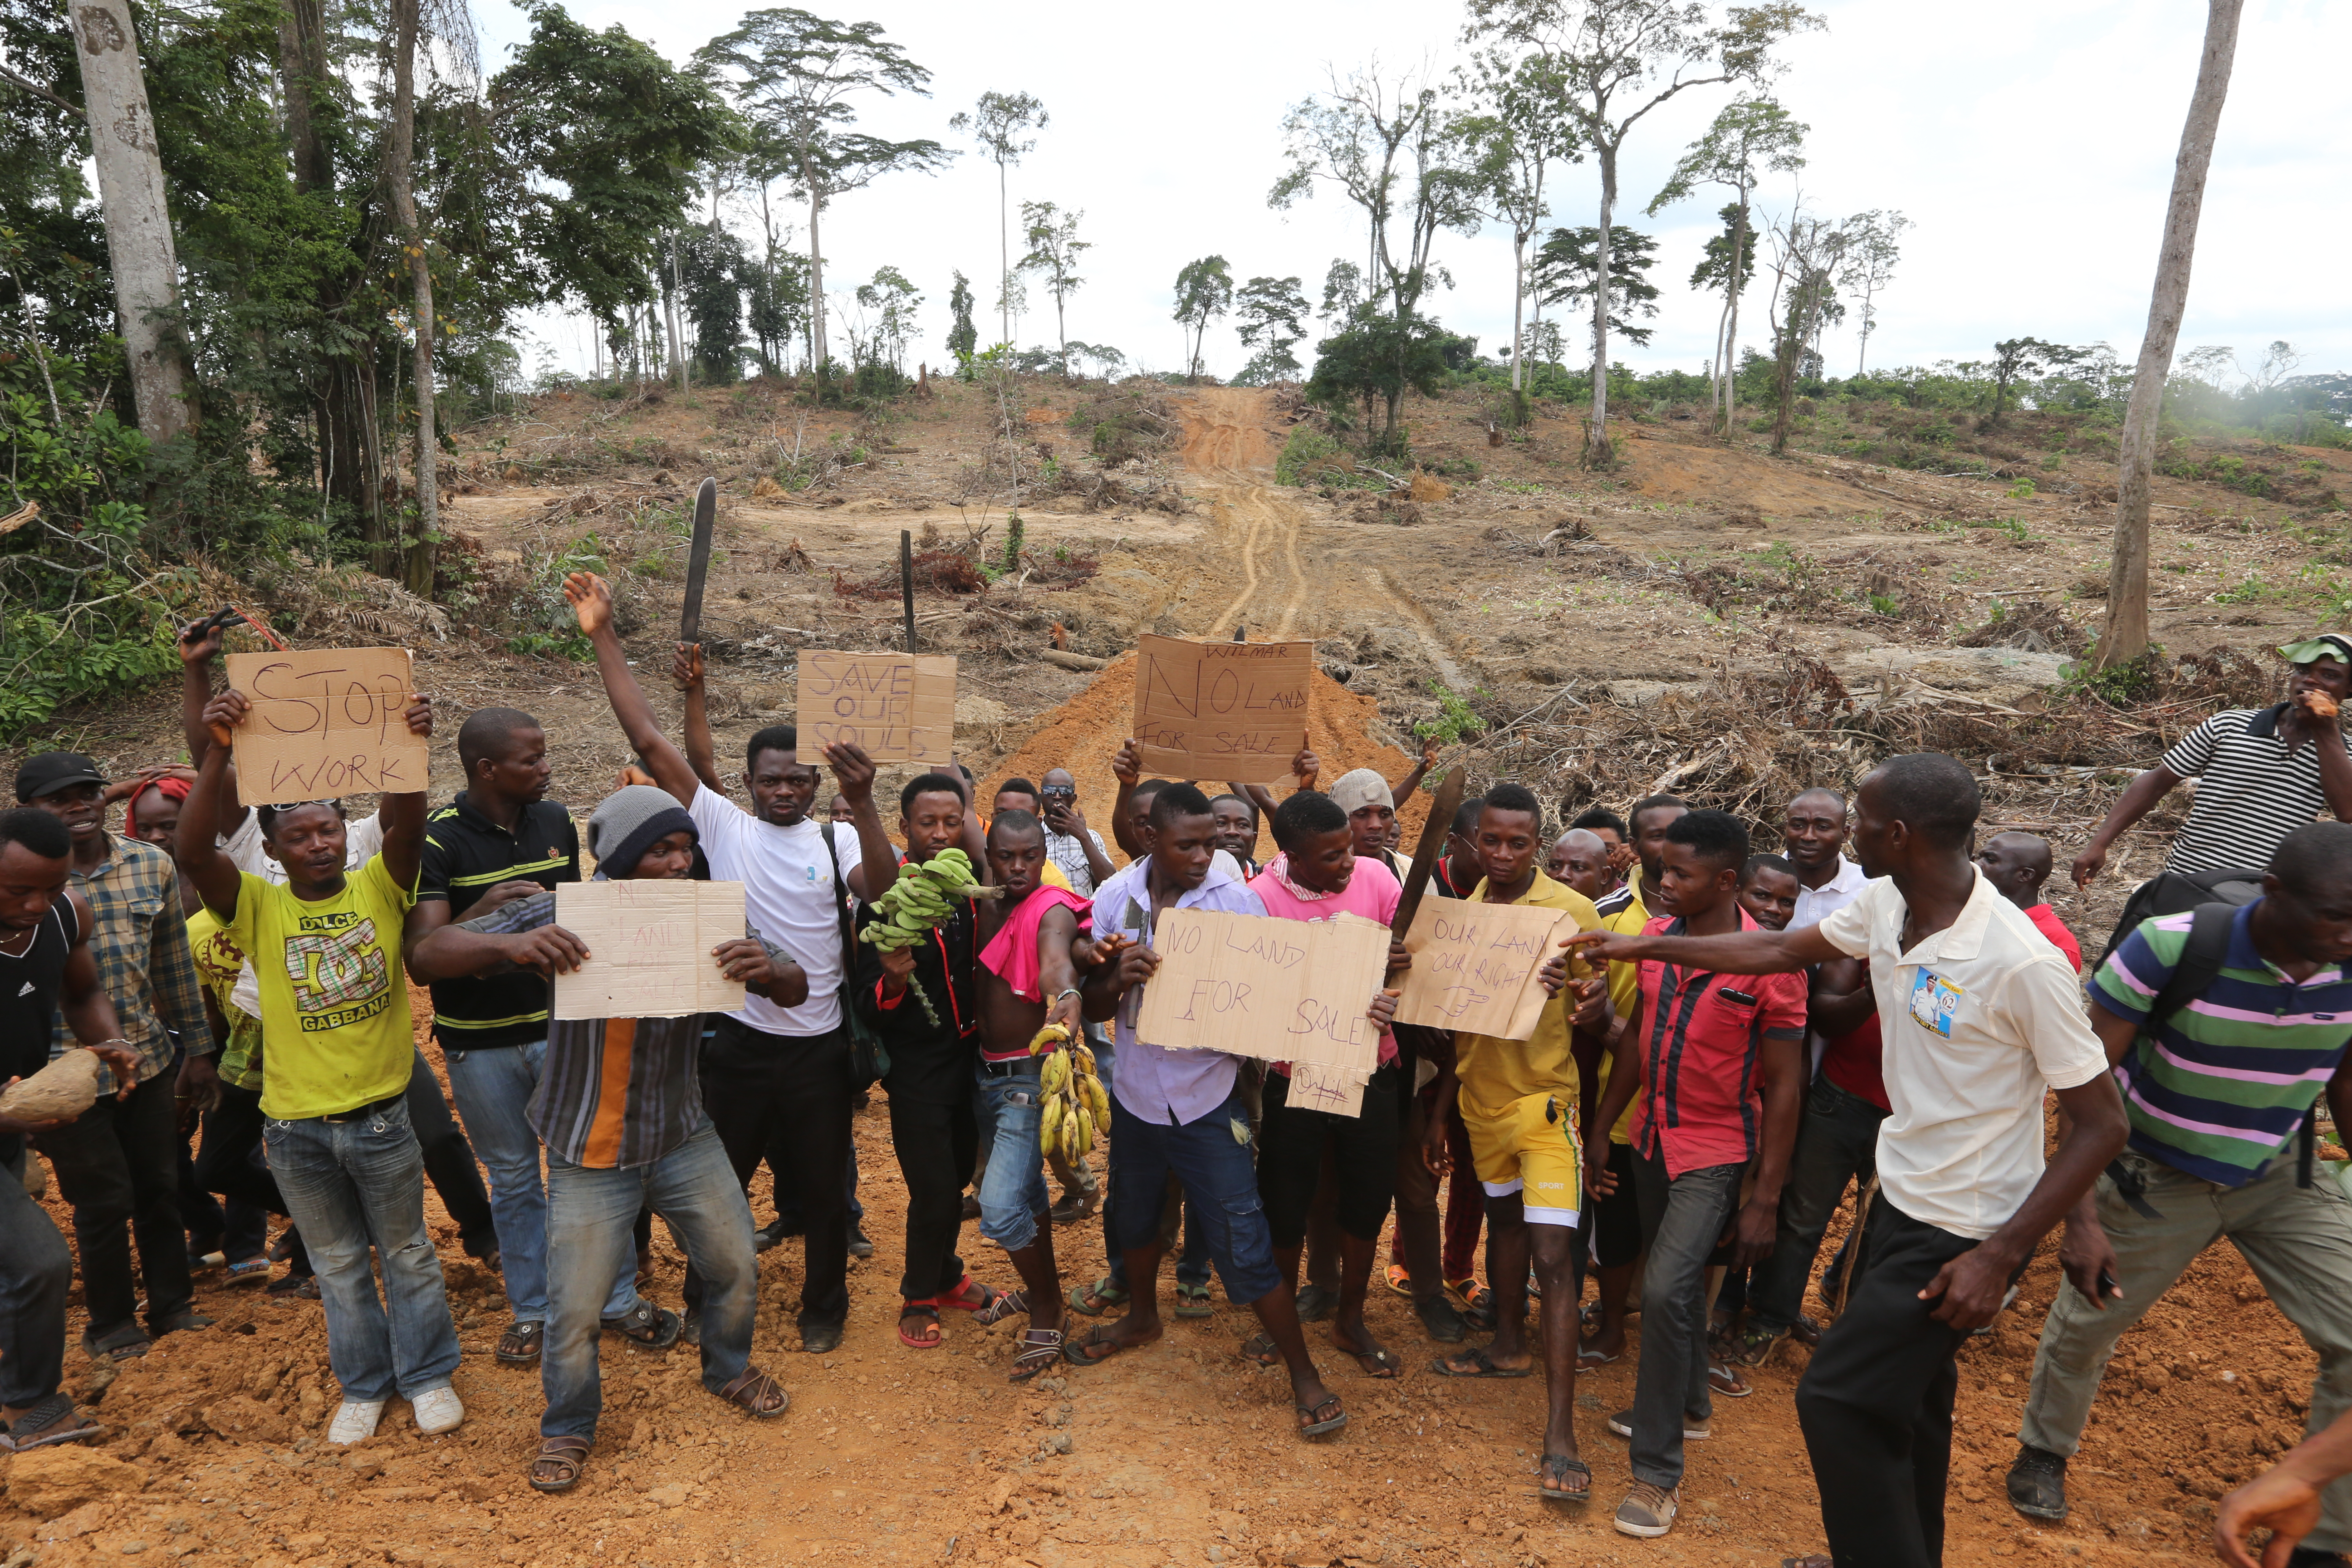 When Wilmar finishes, we have no future left: New report on Nigerian palm oil land grabs